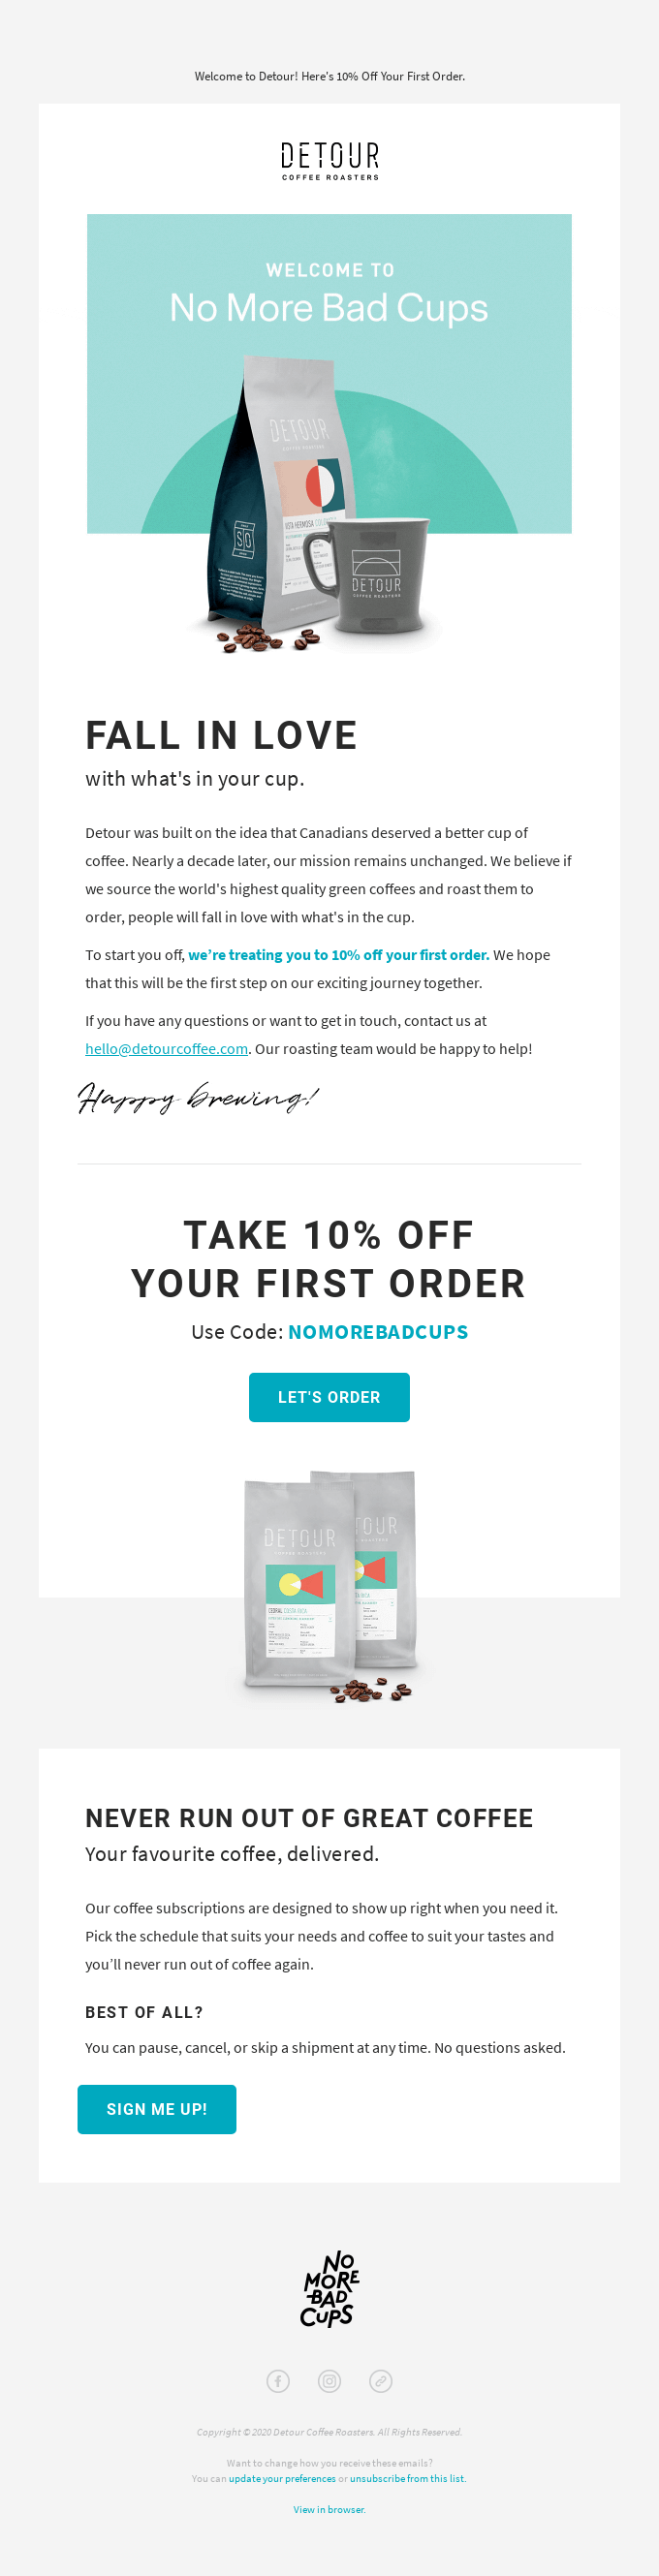 Welcome to Detour! Here's 10% off your first order